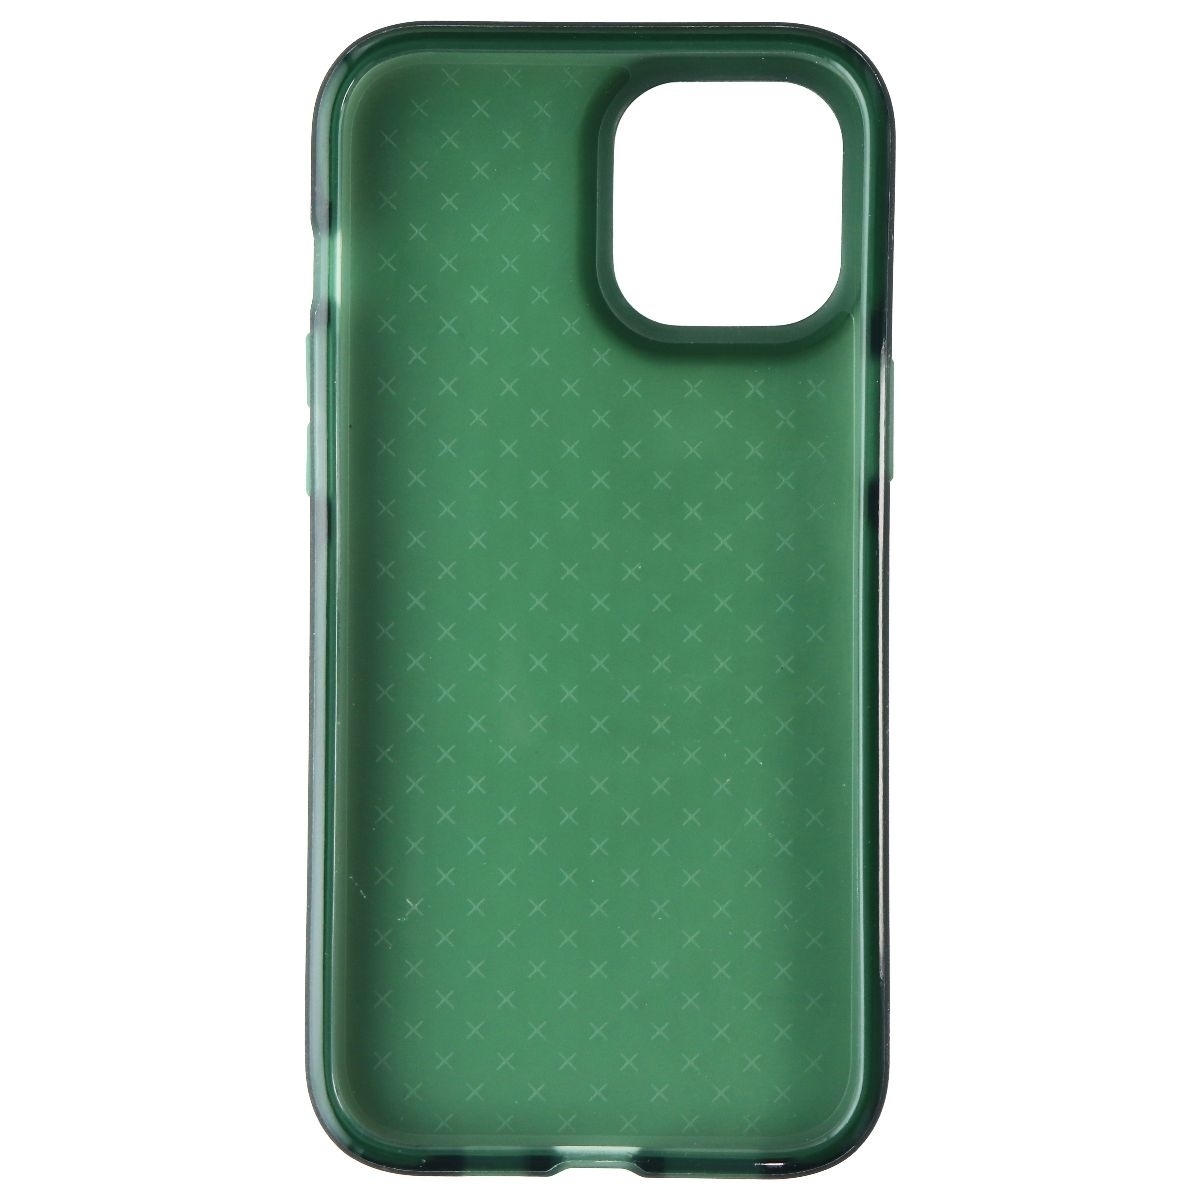 Tech21 Evo Check Series Gel Case For Apple IPhone 13 Pro Max - Sage Green